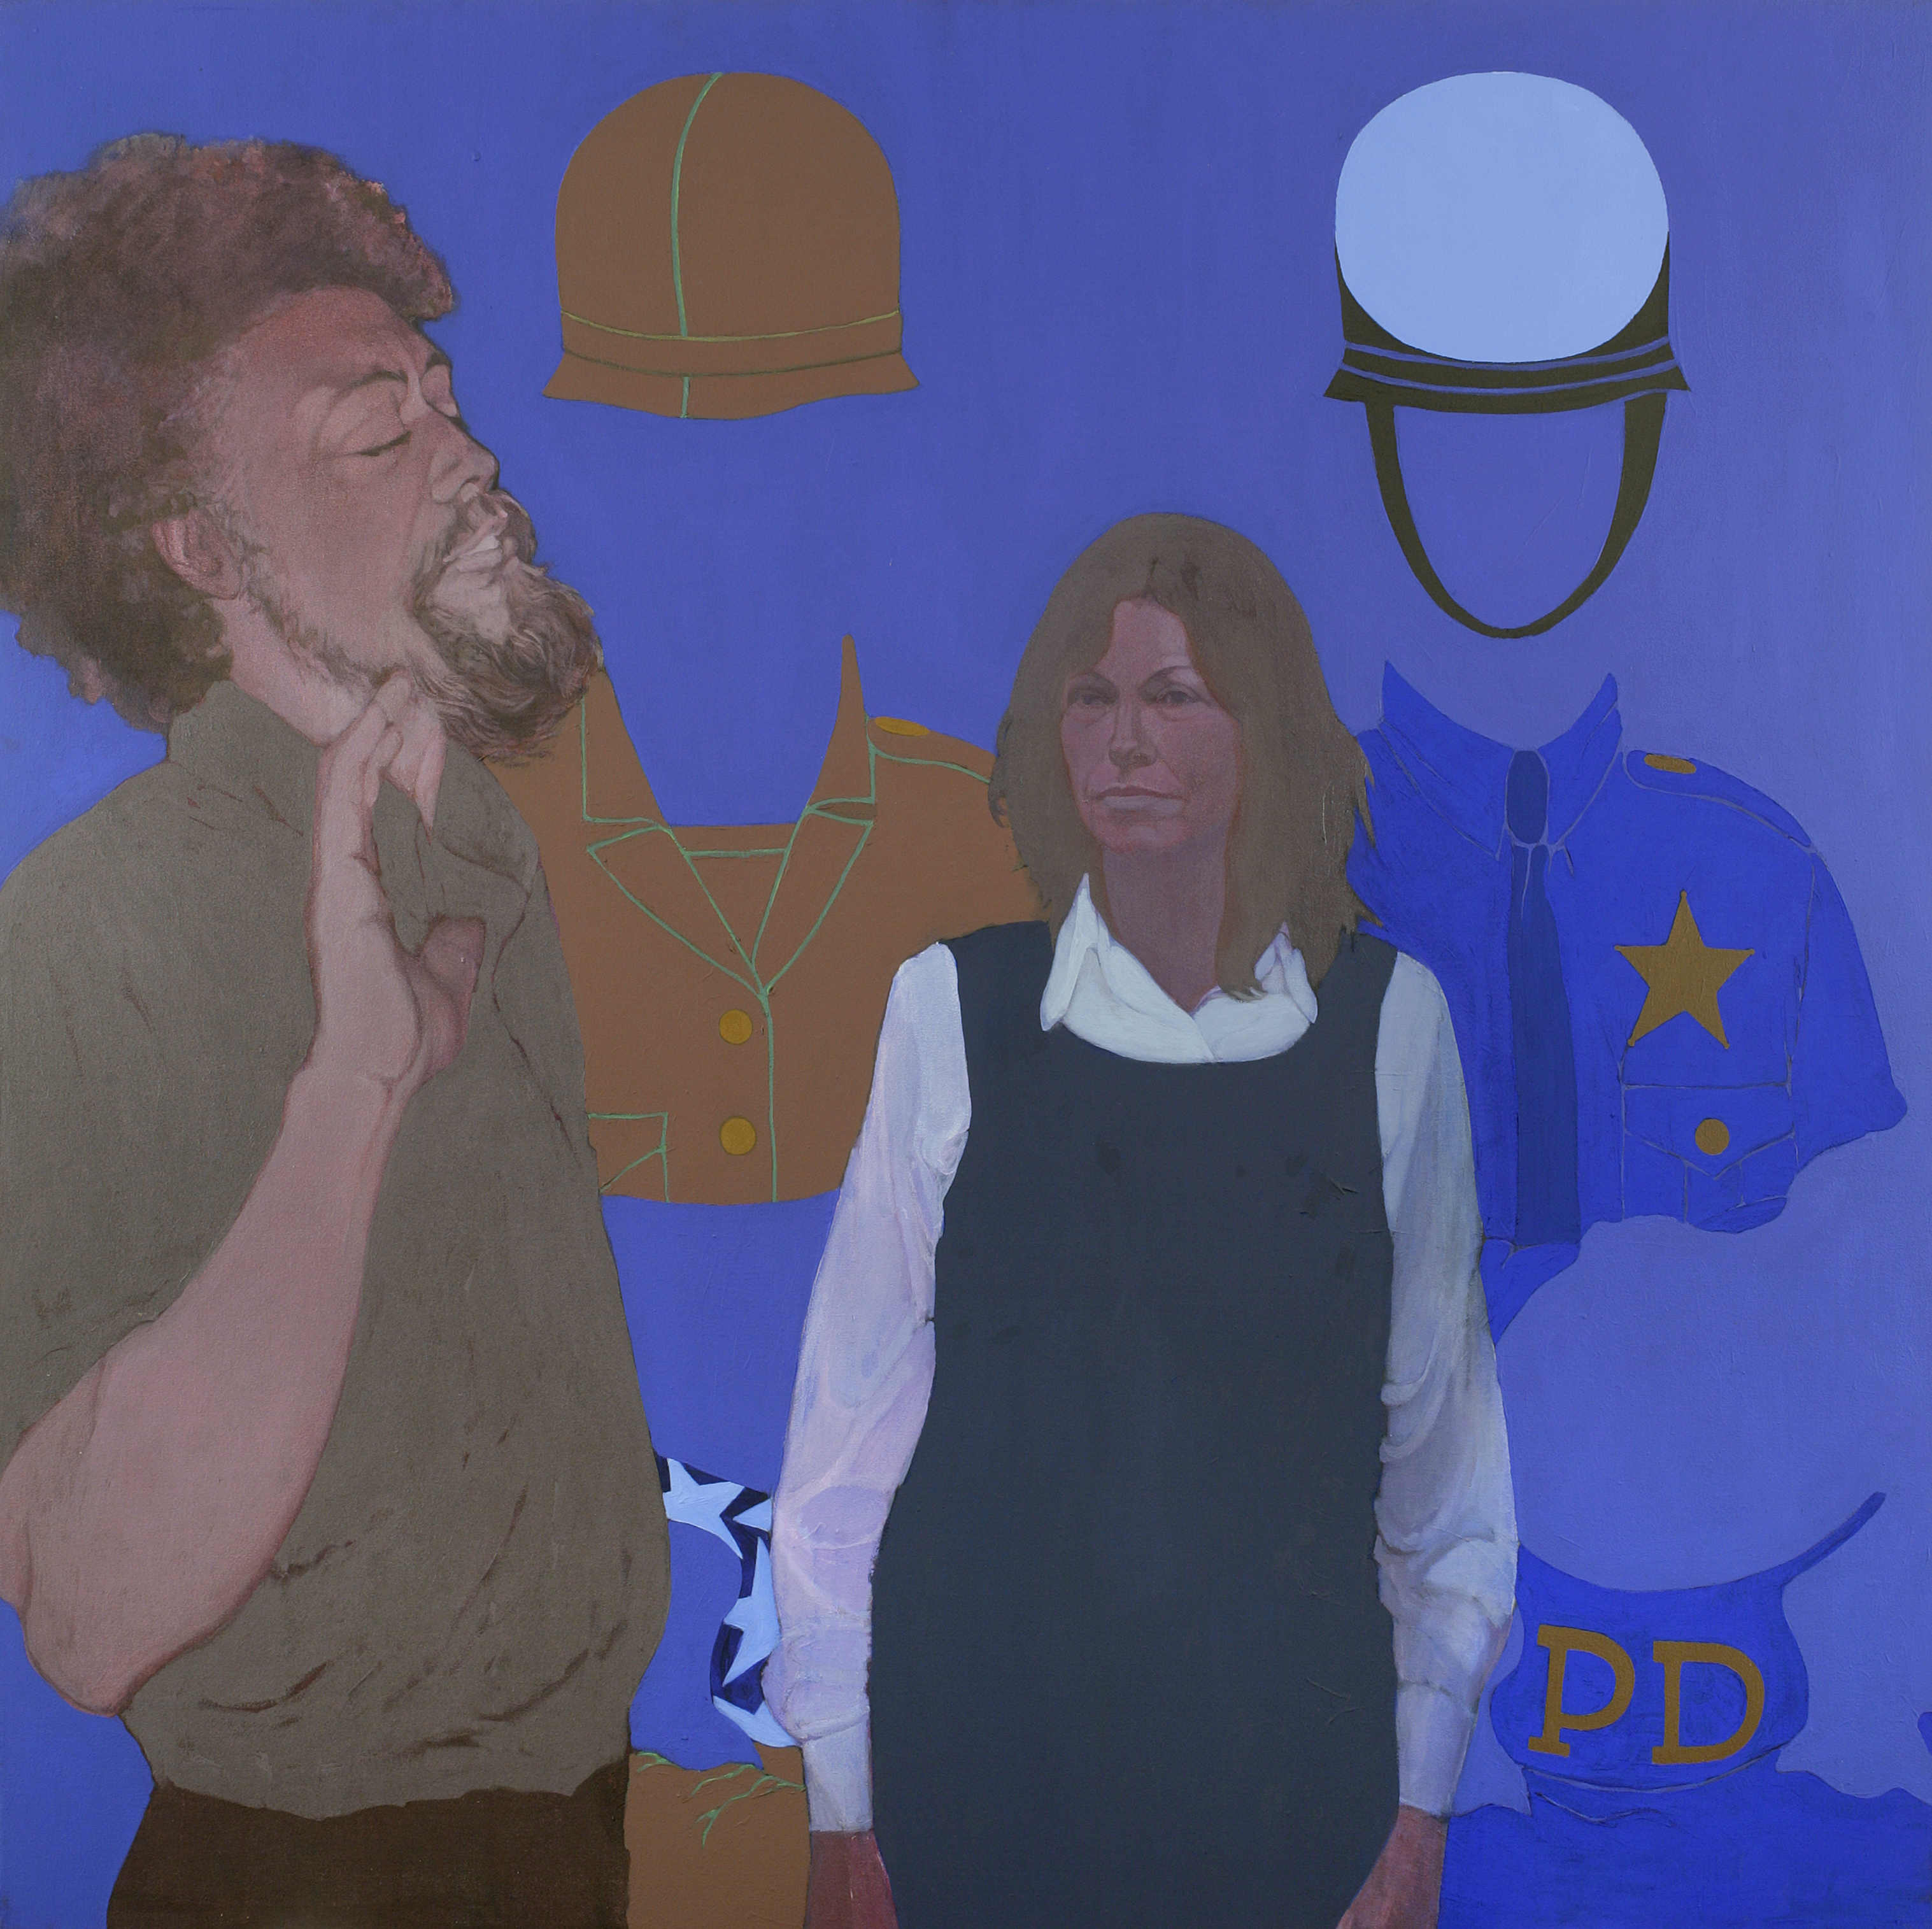 May Stevens, "Benny Andrews, the Artist, and Big Daddy Paper Doll," 1976, Acrylic on canvas, 60 1/4 x 60 1/4 in., National Academy of Design, New York